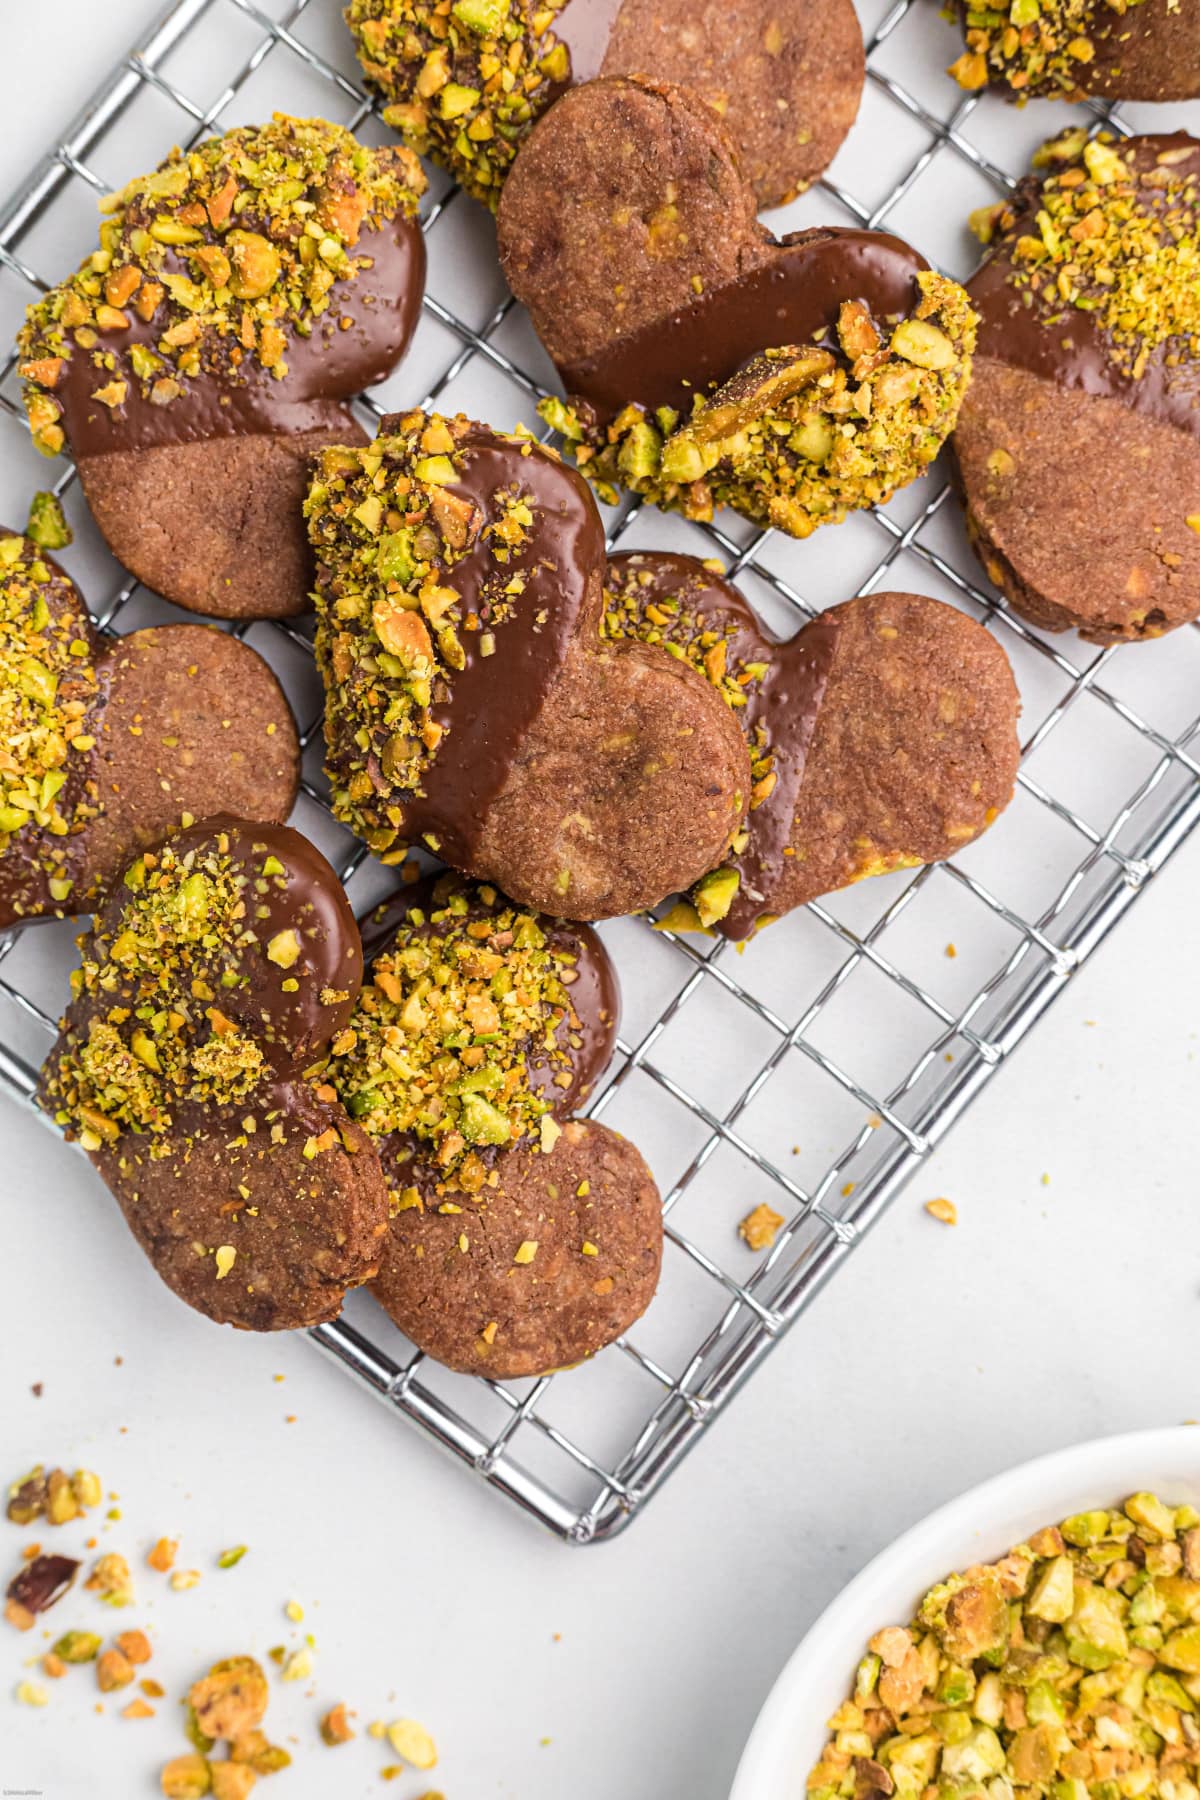 chocolate heart cookies dipped in chocolate and pistachio